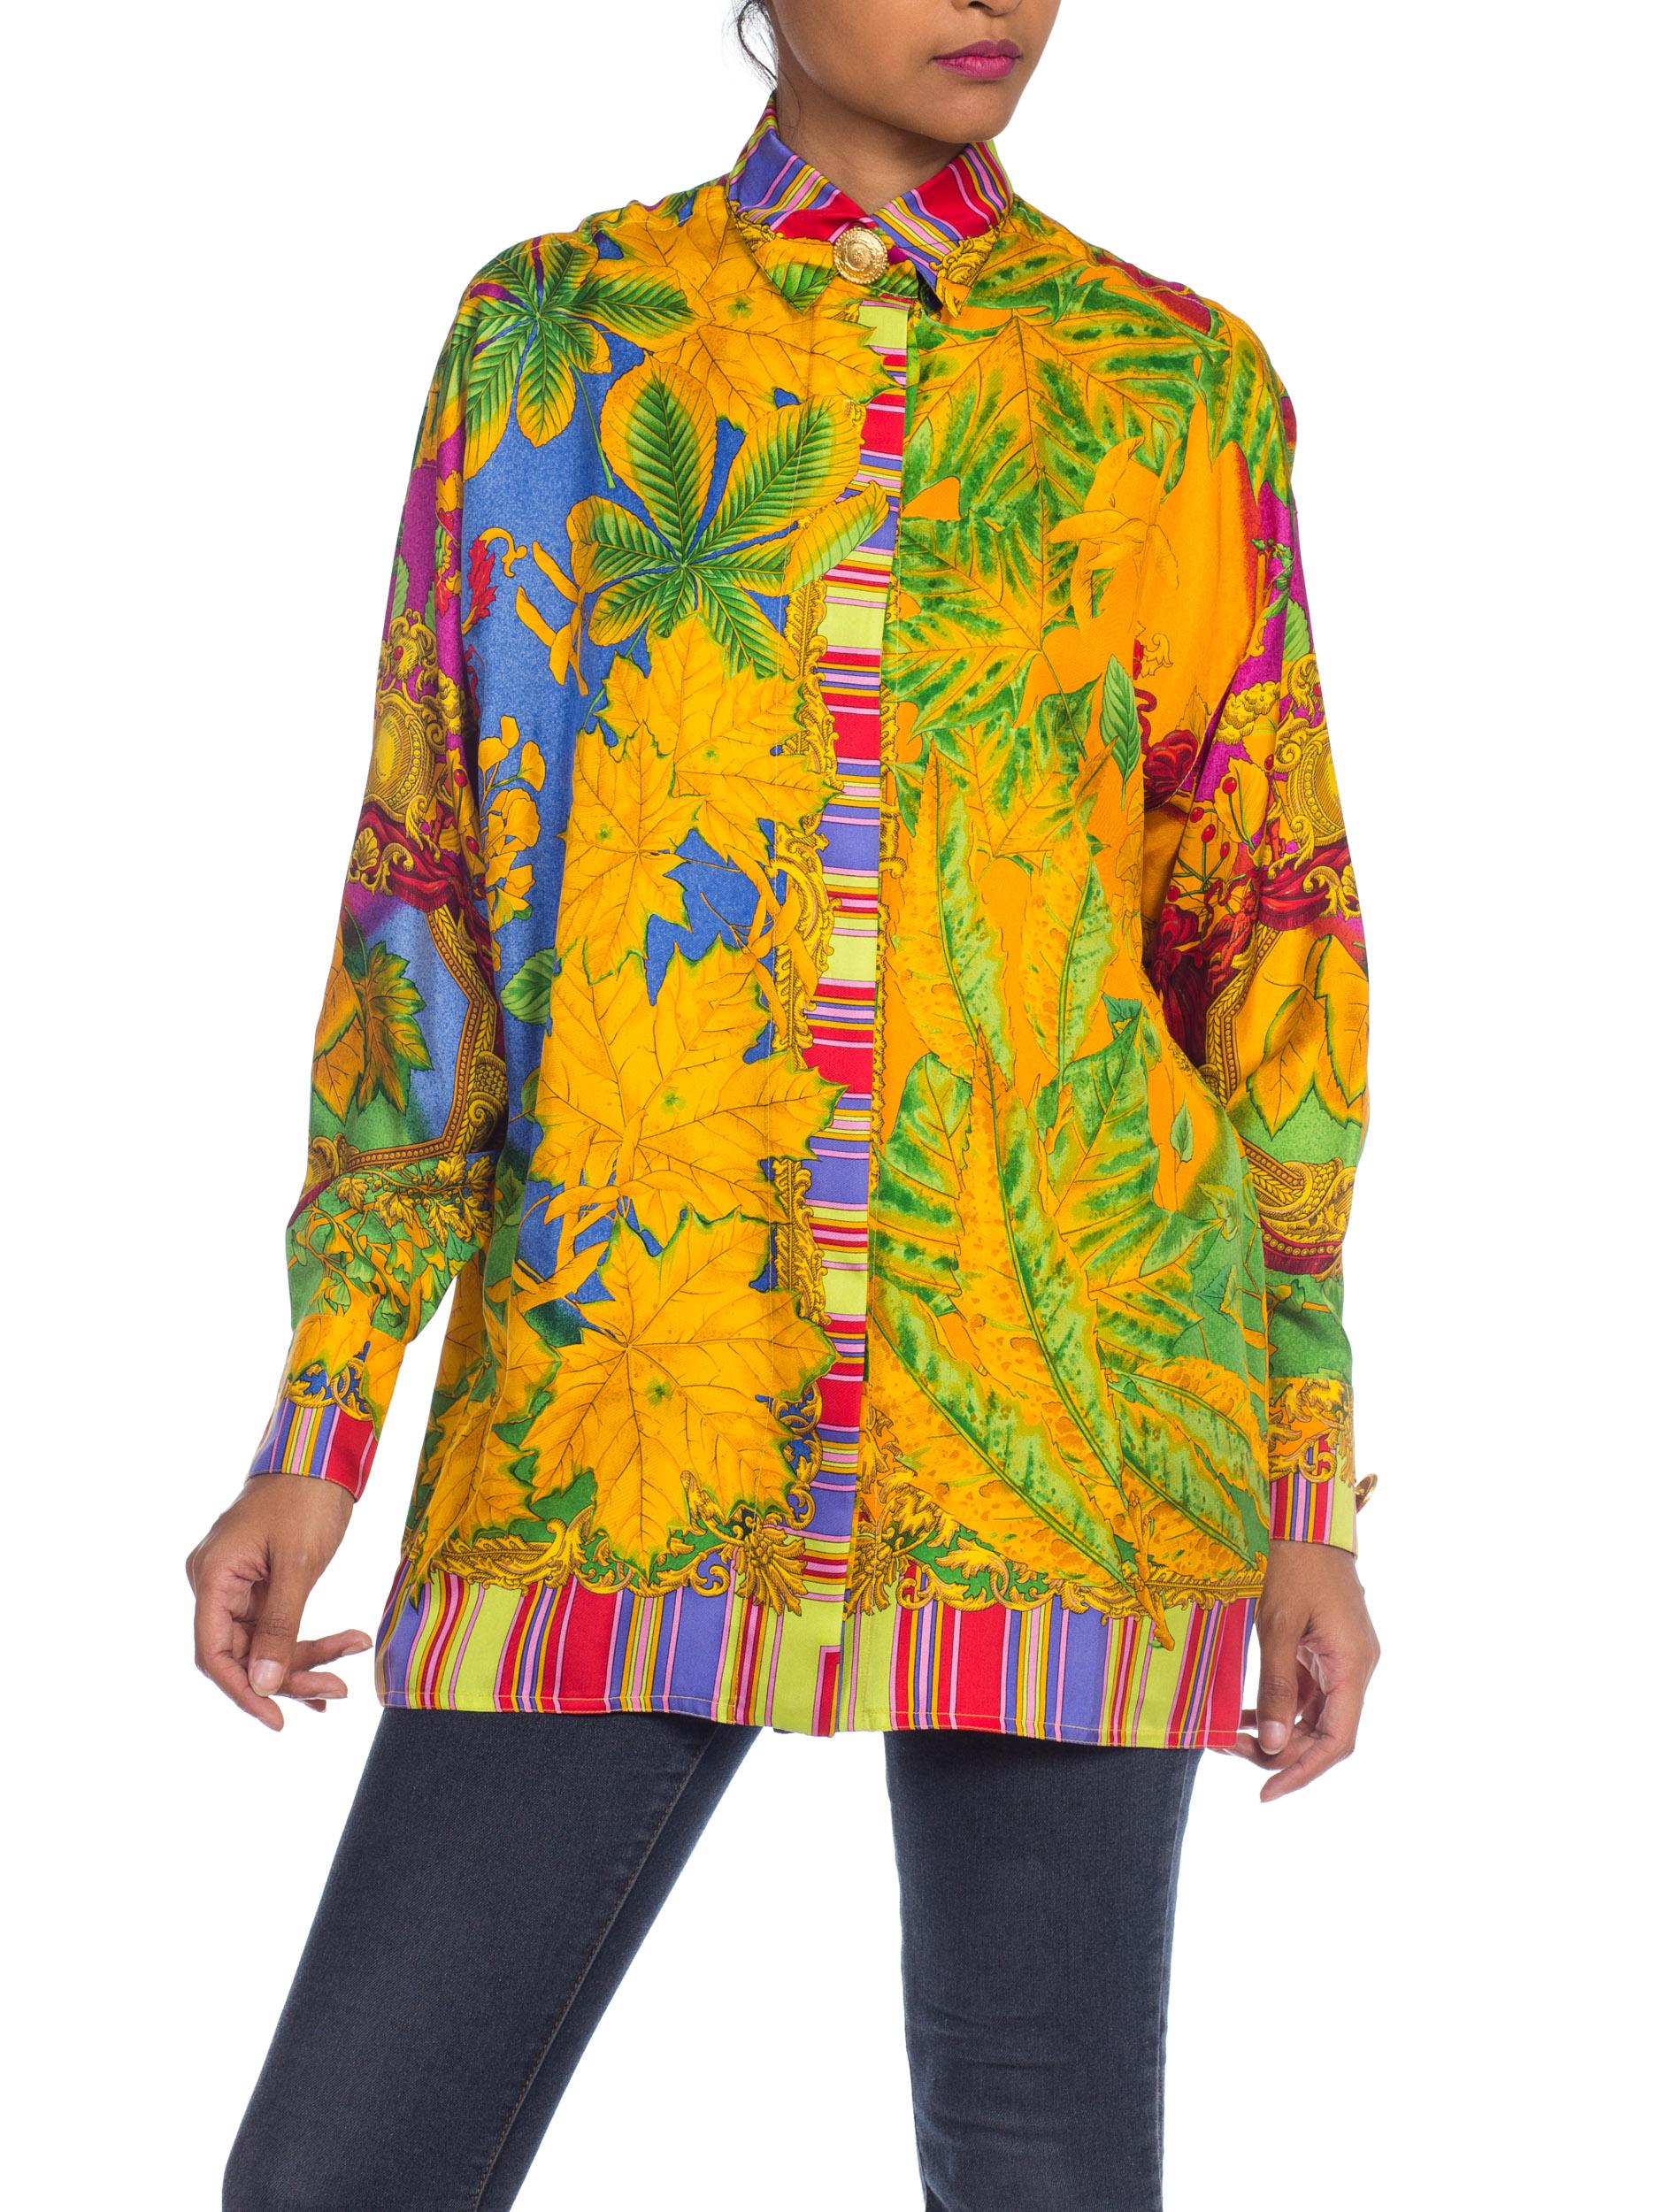 1990S ATELIER GIANNI VERSACE Printed Silk Baroque Leaves Shirt Sz 38 For Sale 8